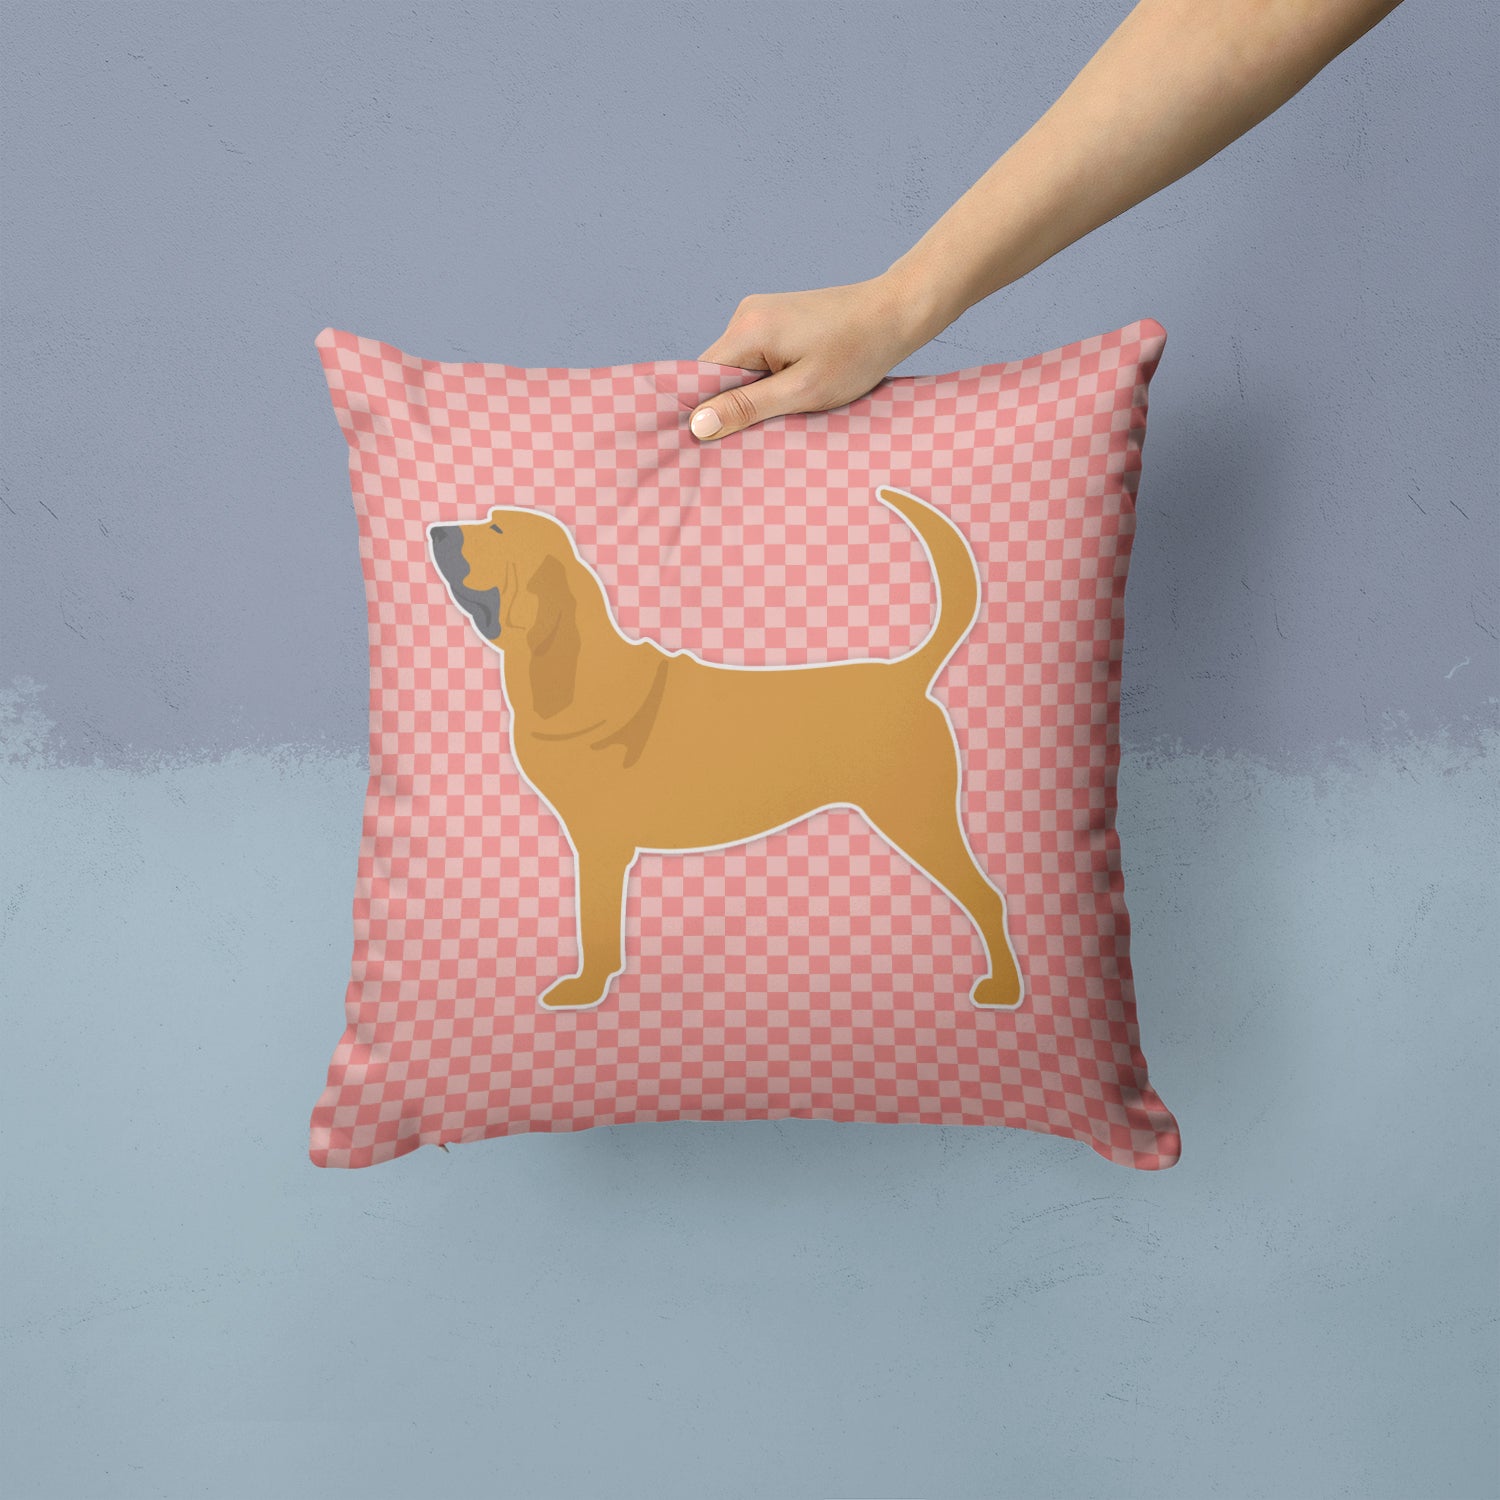 Bloodhound Checkerboard Pink Fabric Decorative Pillow BB3584PW1414 - the-store.com